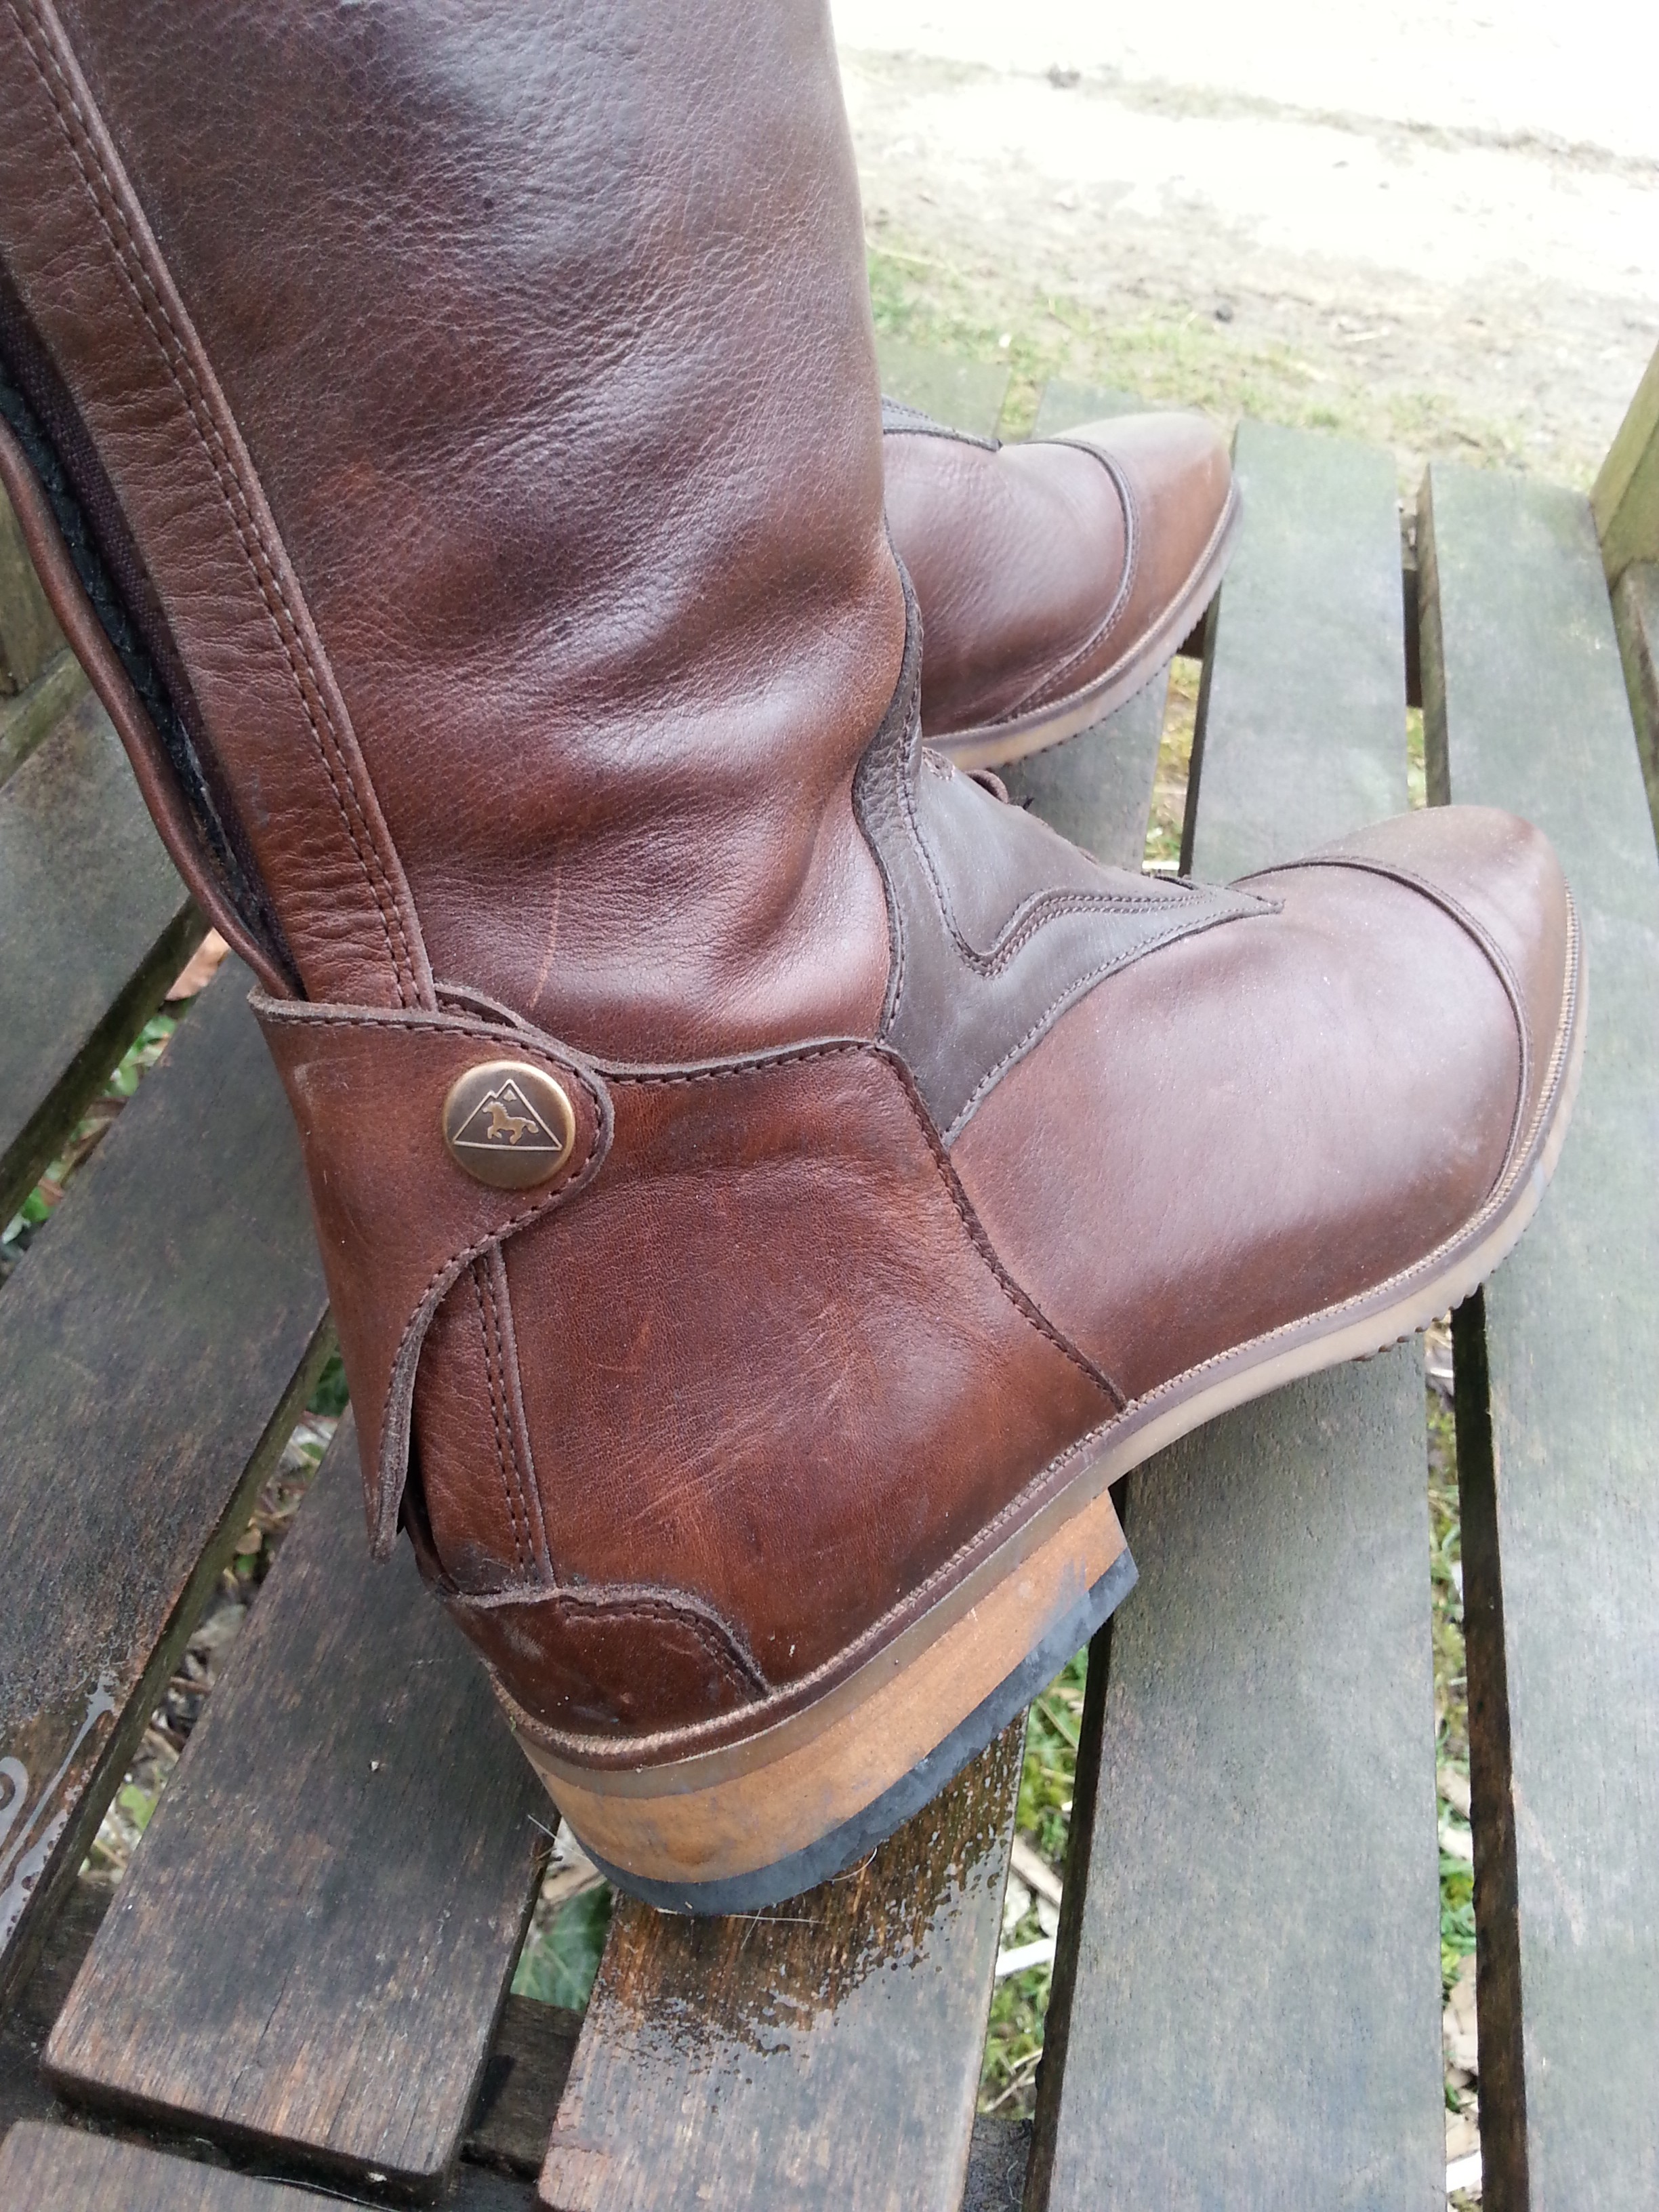 mountain horse sovereign paddock boots